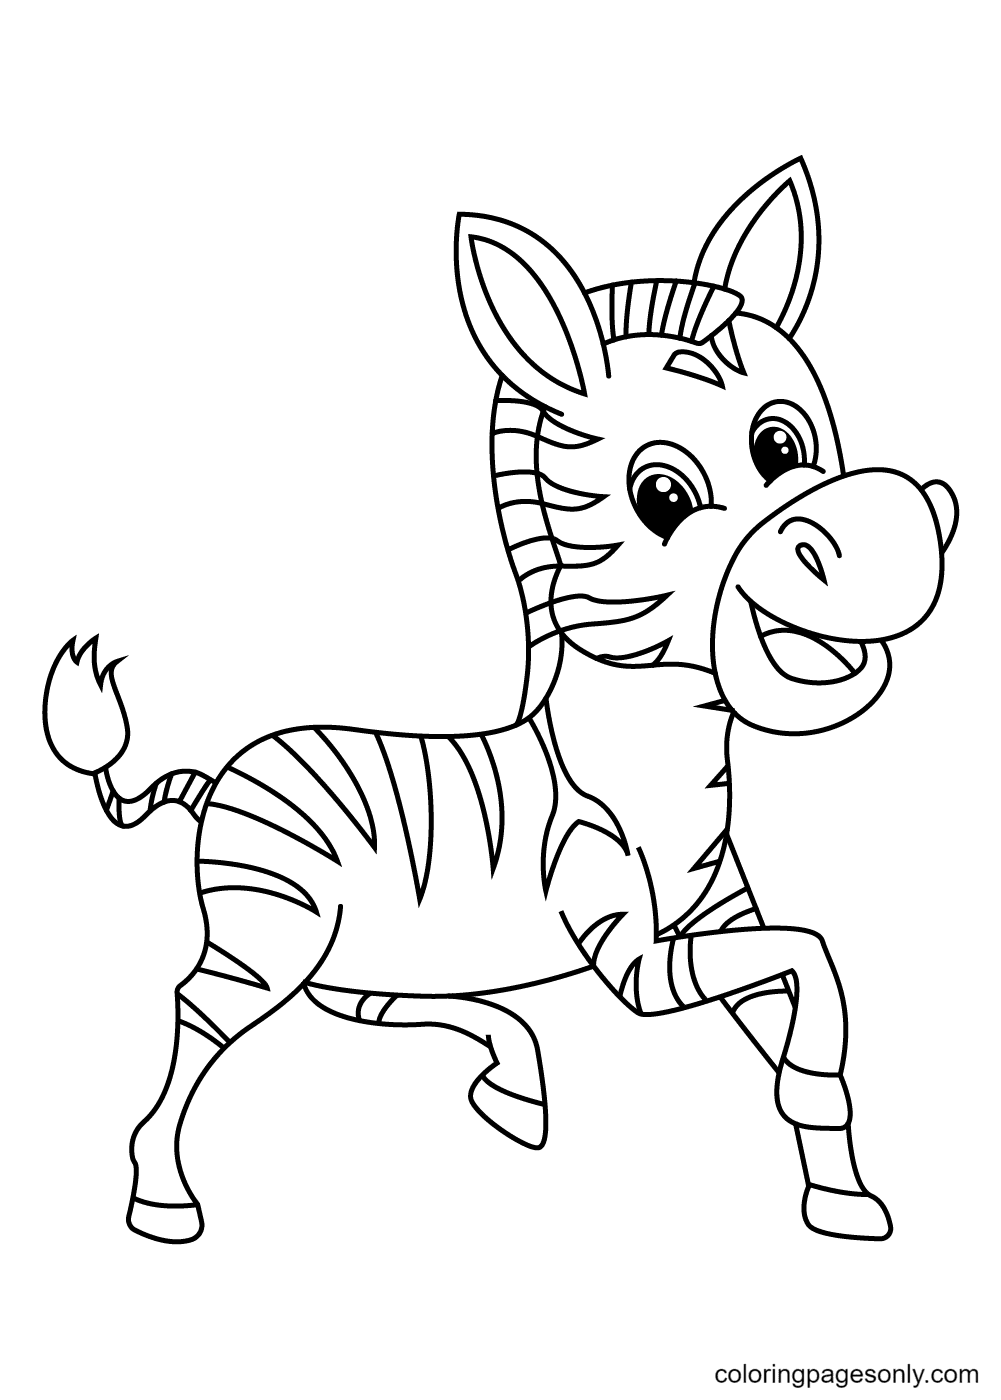 Zebra happy and smiling Coloring Page